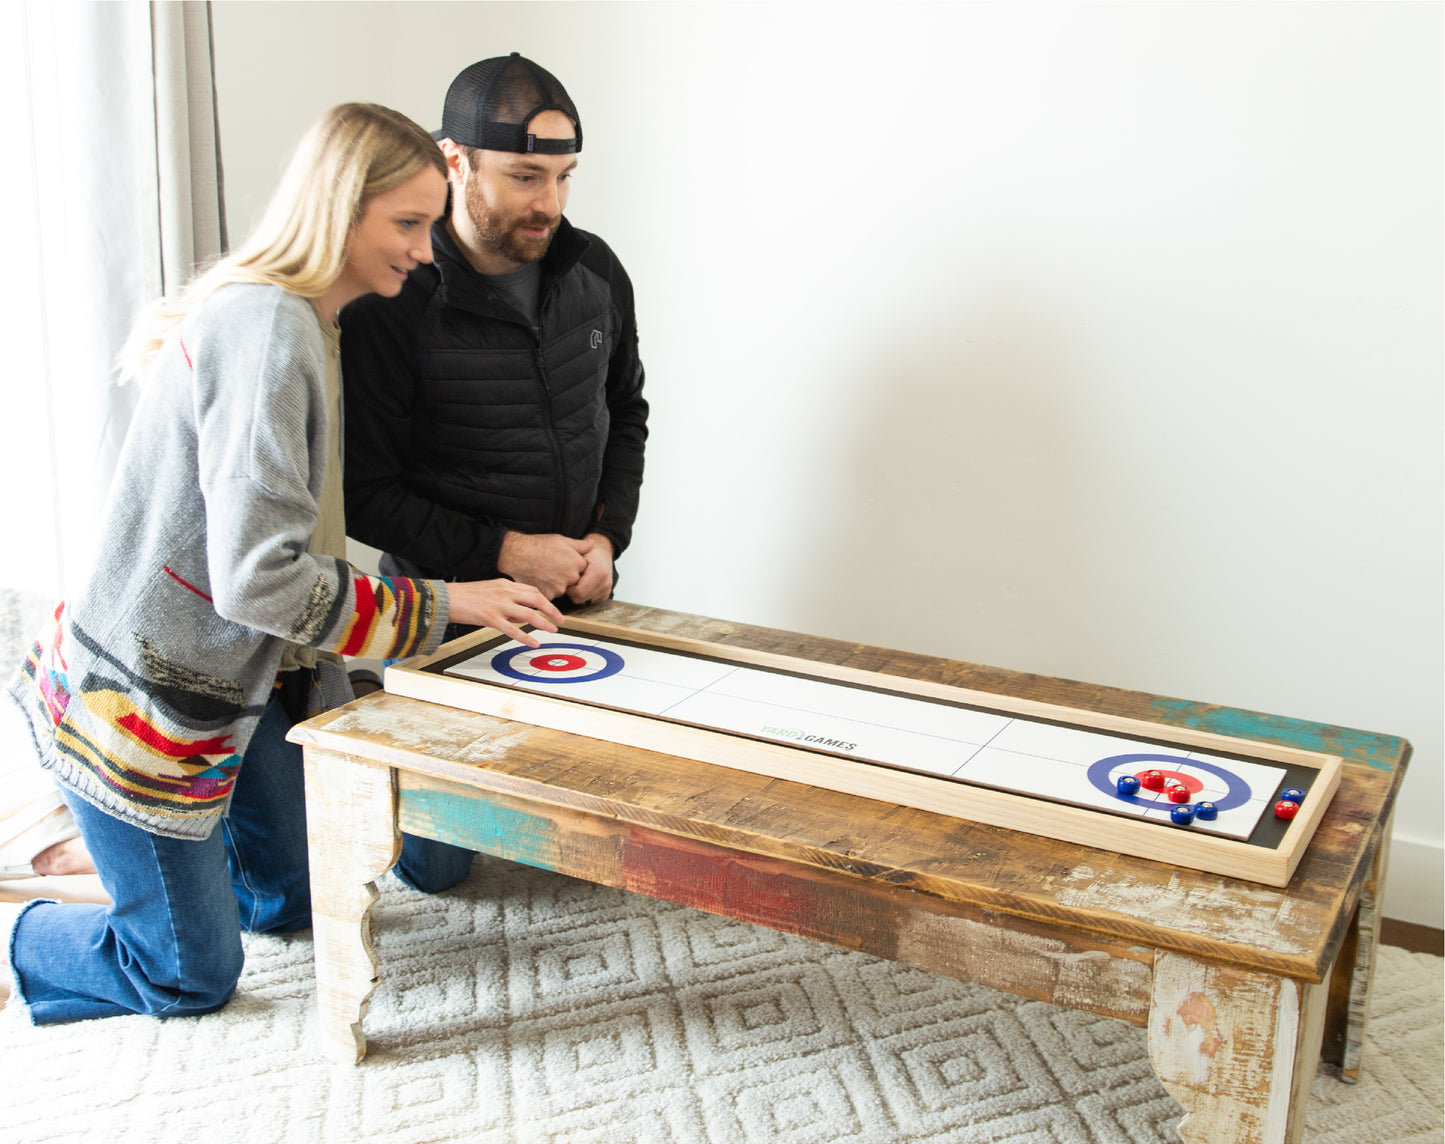 Curling and Shuffleboard 2 in 1 Table Top Game with 8 Rolling Discs